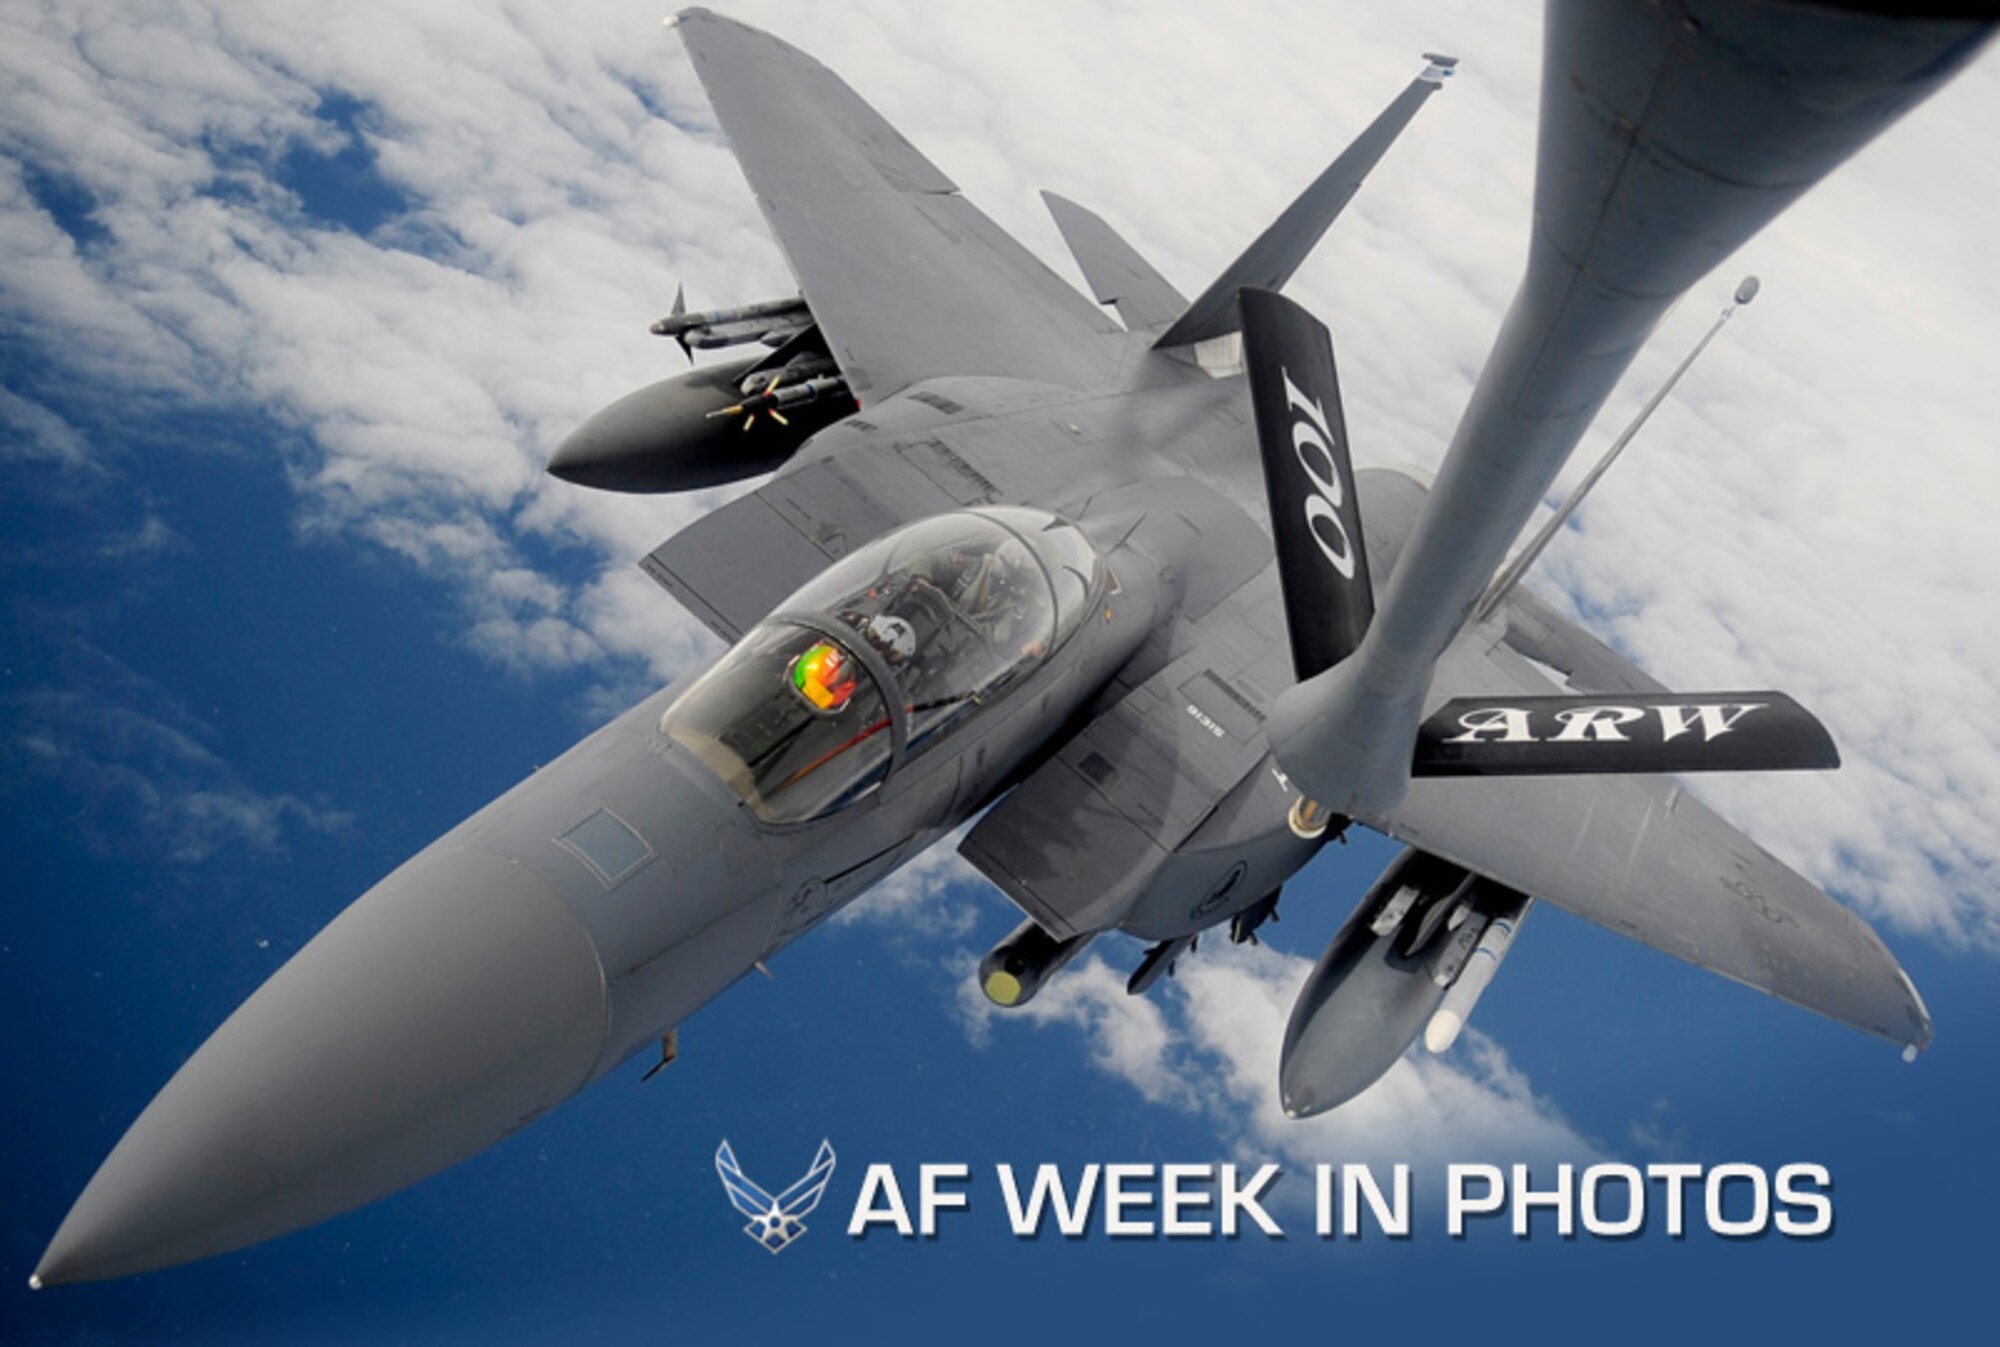 An F-15E Strike Eagle receives fuel from a 100th Air Refueling Wing KC-135 Stratotanker during an aerial refueling mission Sept. 10, 2012, over the Atlantic Ocean. The refueling was part of a training mission for the 48th Fighter Wing, RAF Lakenheath and 100th ARW. (U.S. Air Force photo/Senior Airman Ethan Morgan)
